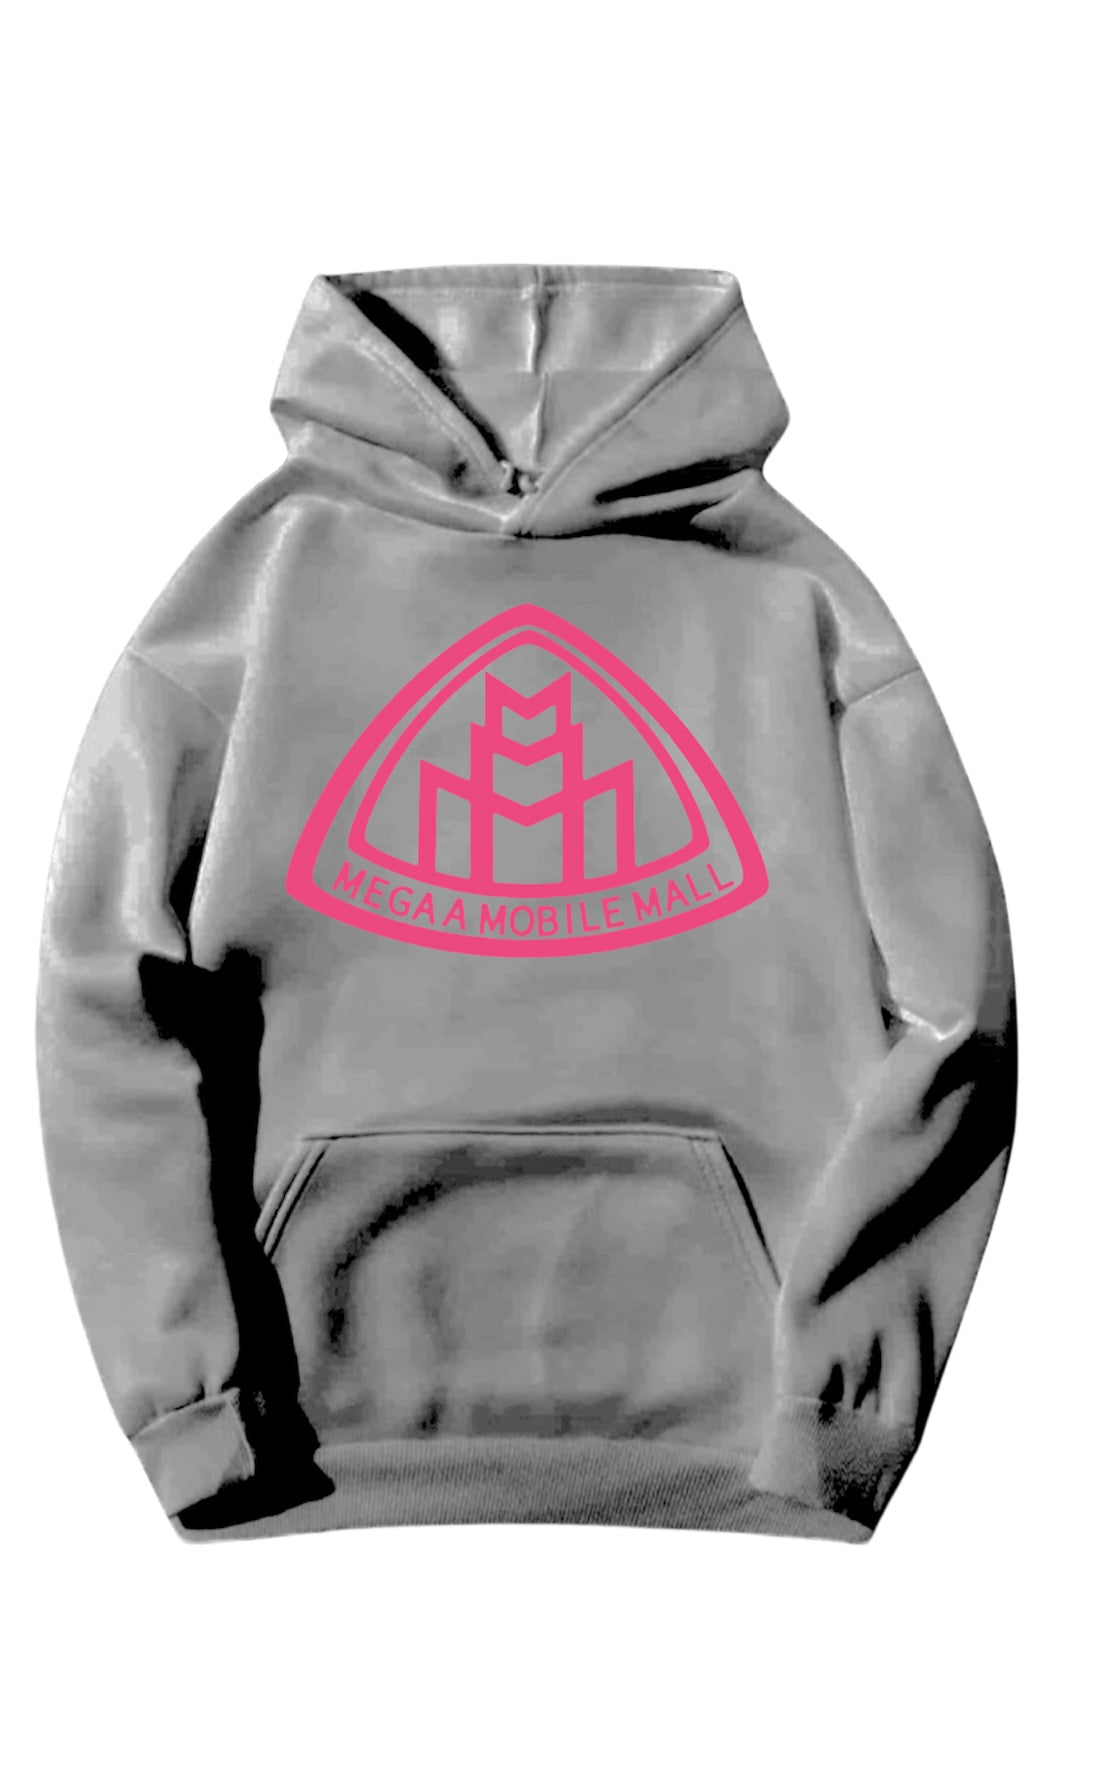 gray megaamobilemall logo Heavy Blend Fleece Hoodie with pink logo